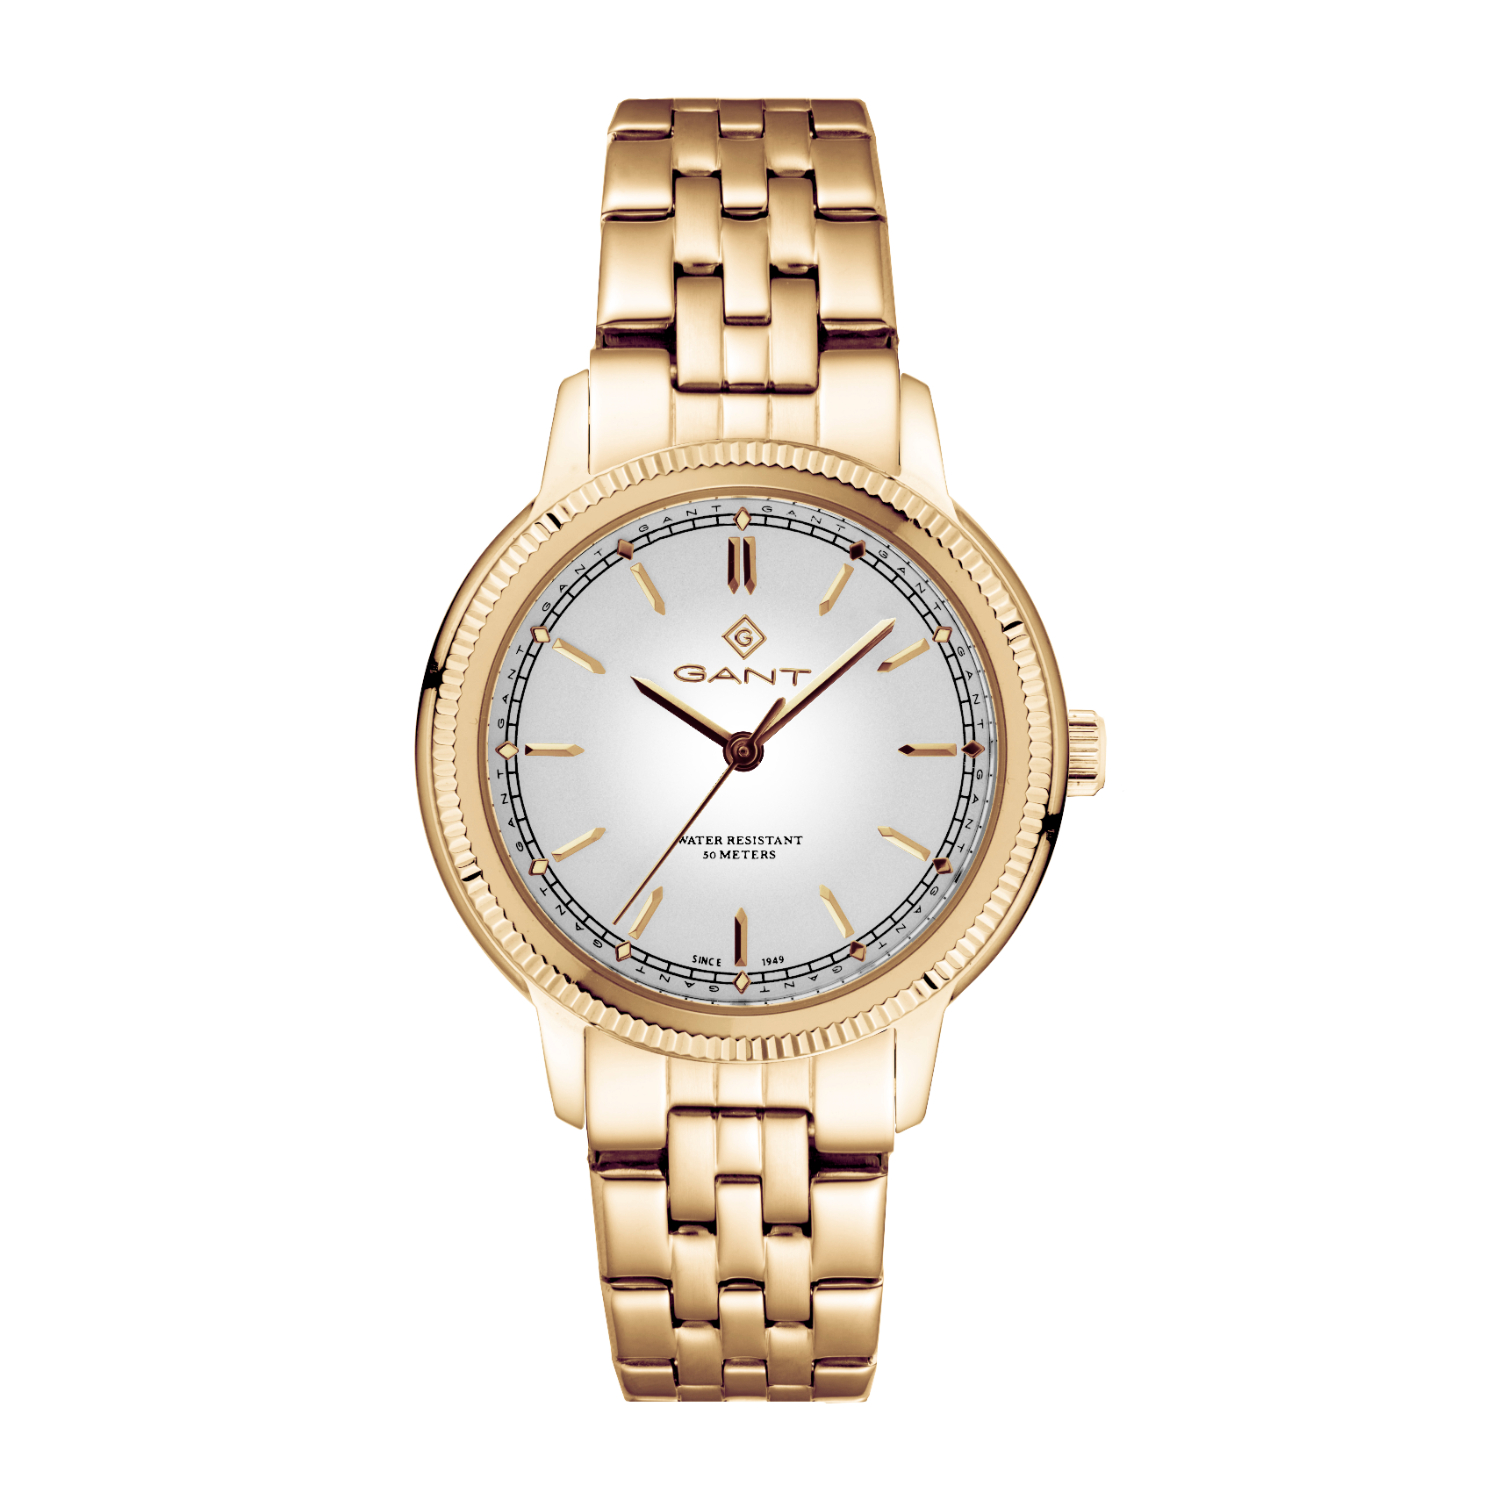 GANT womens watch in gold stainless steel with white dial and bracelet.